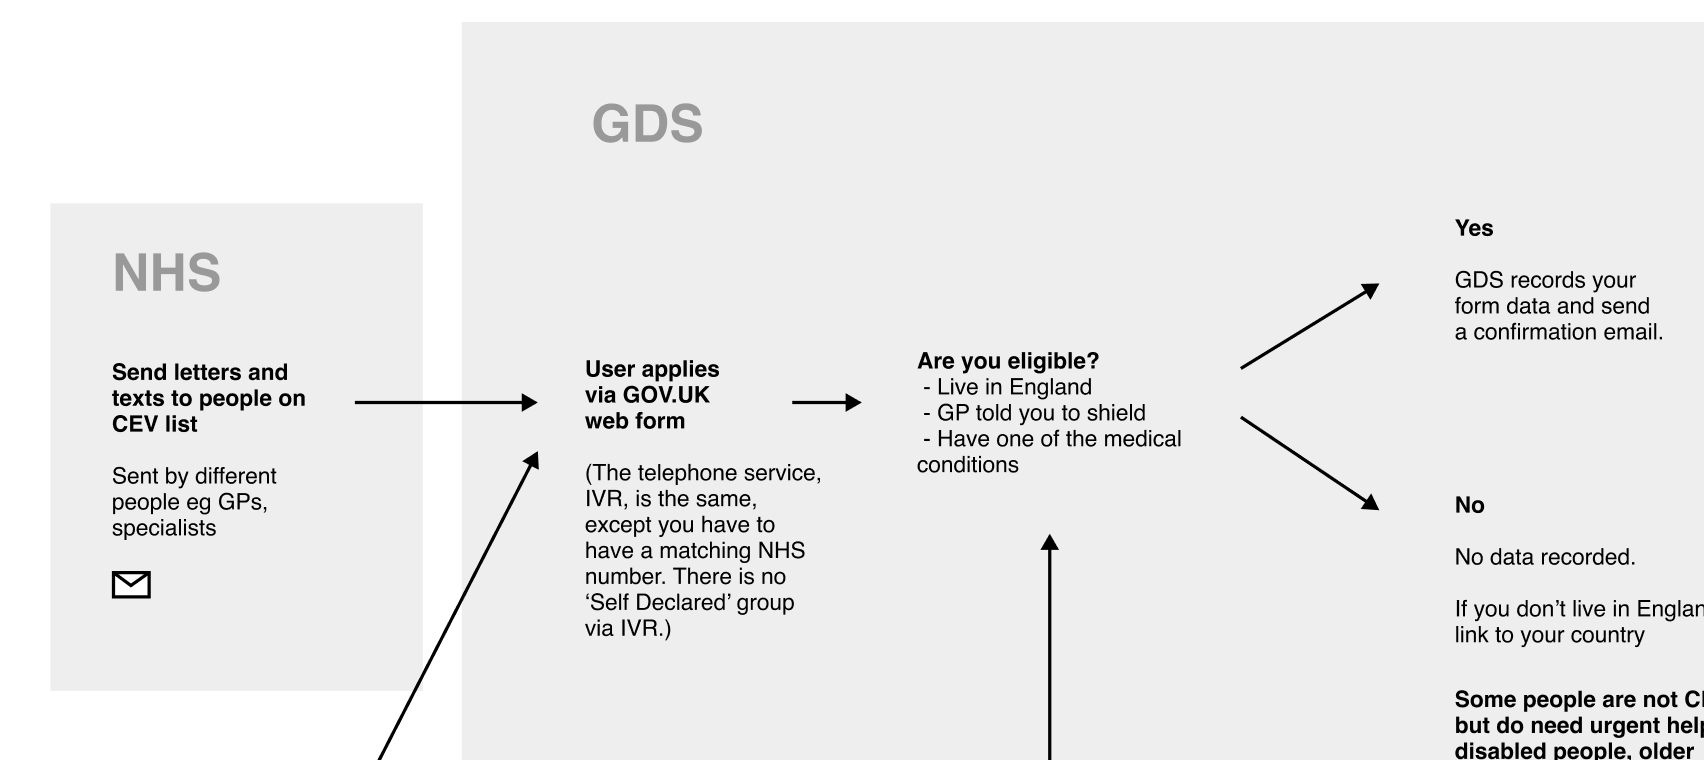 Part of a service map. Shows a journey starting with the NHS sending letters to vulnerale people, then people coming to the GDS web service, where they are asked if they are eligible, which makes the journey branch.